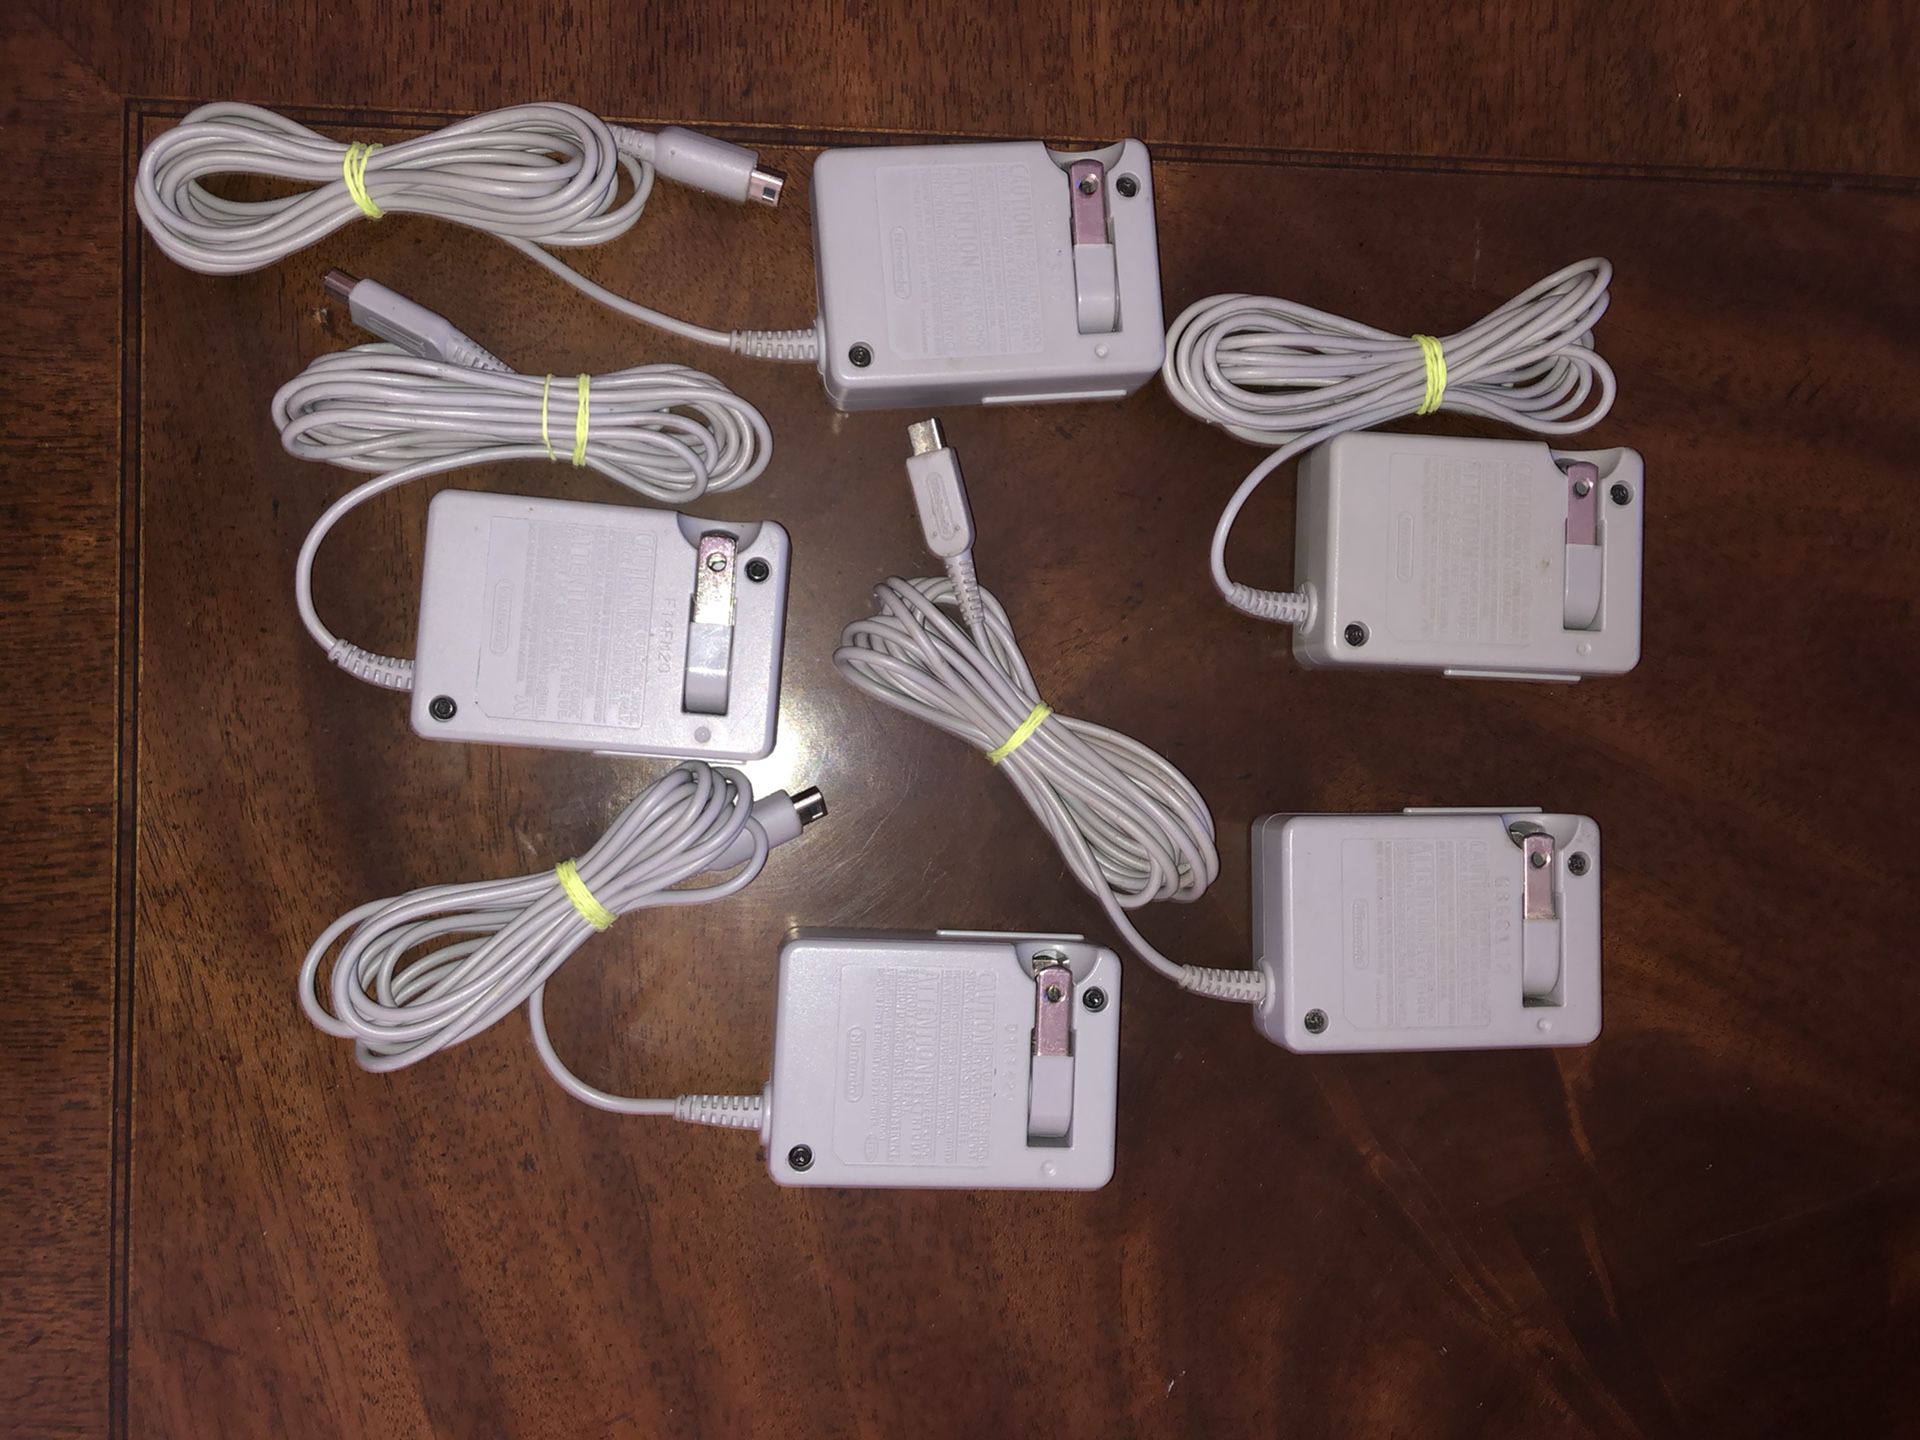 Nintendo 3Ds chargers